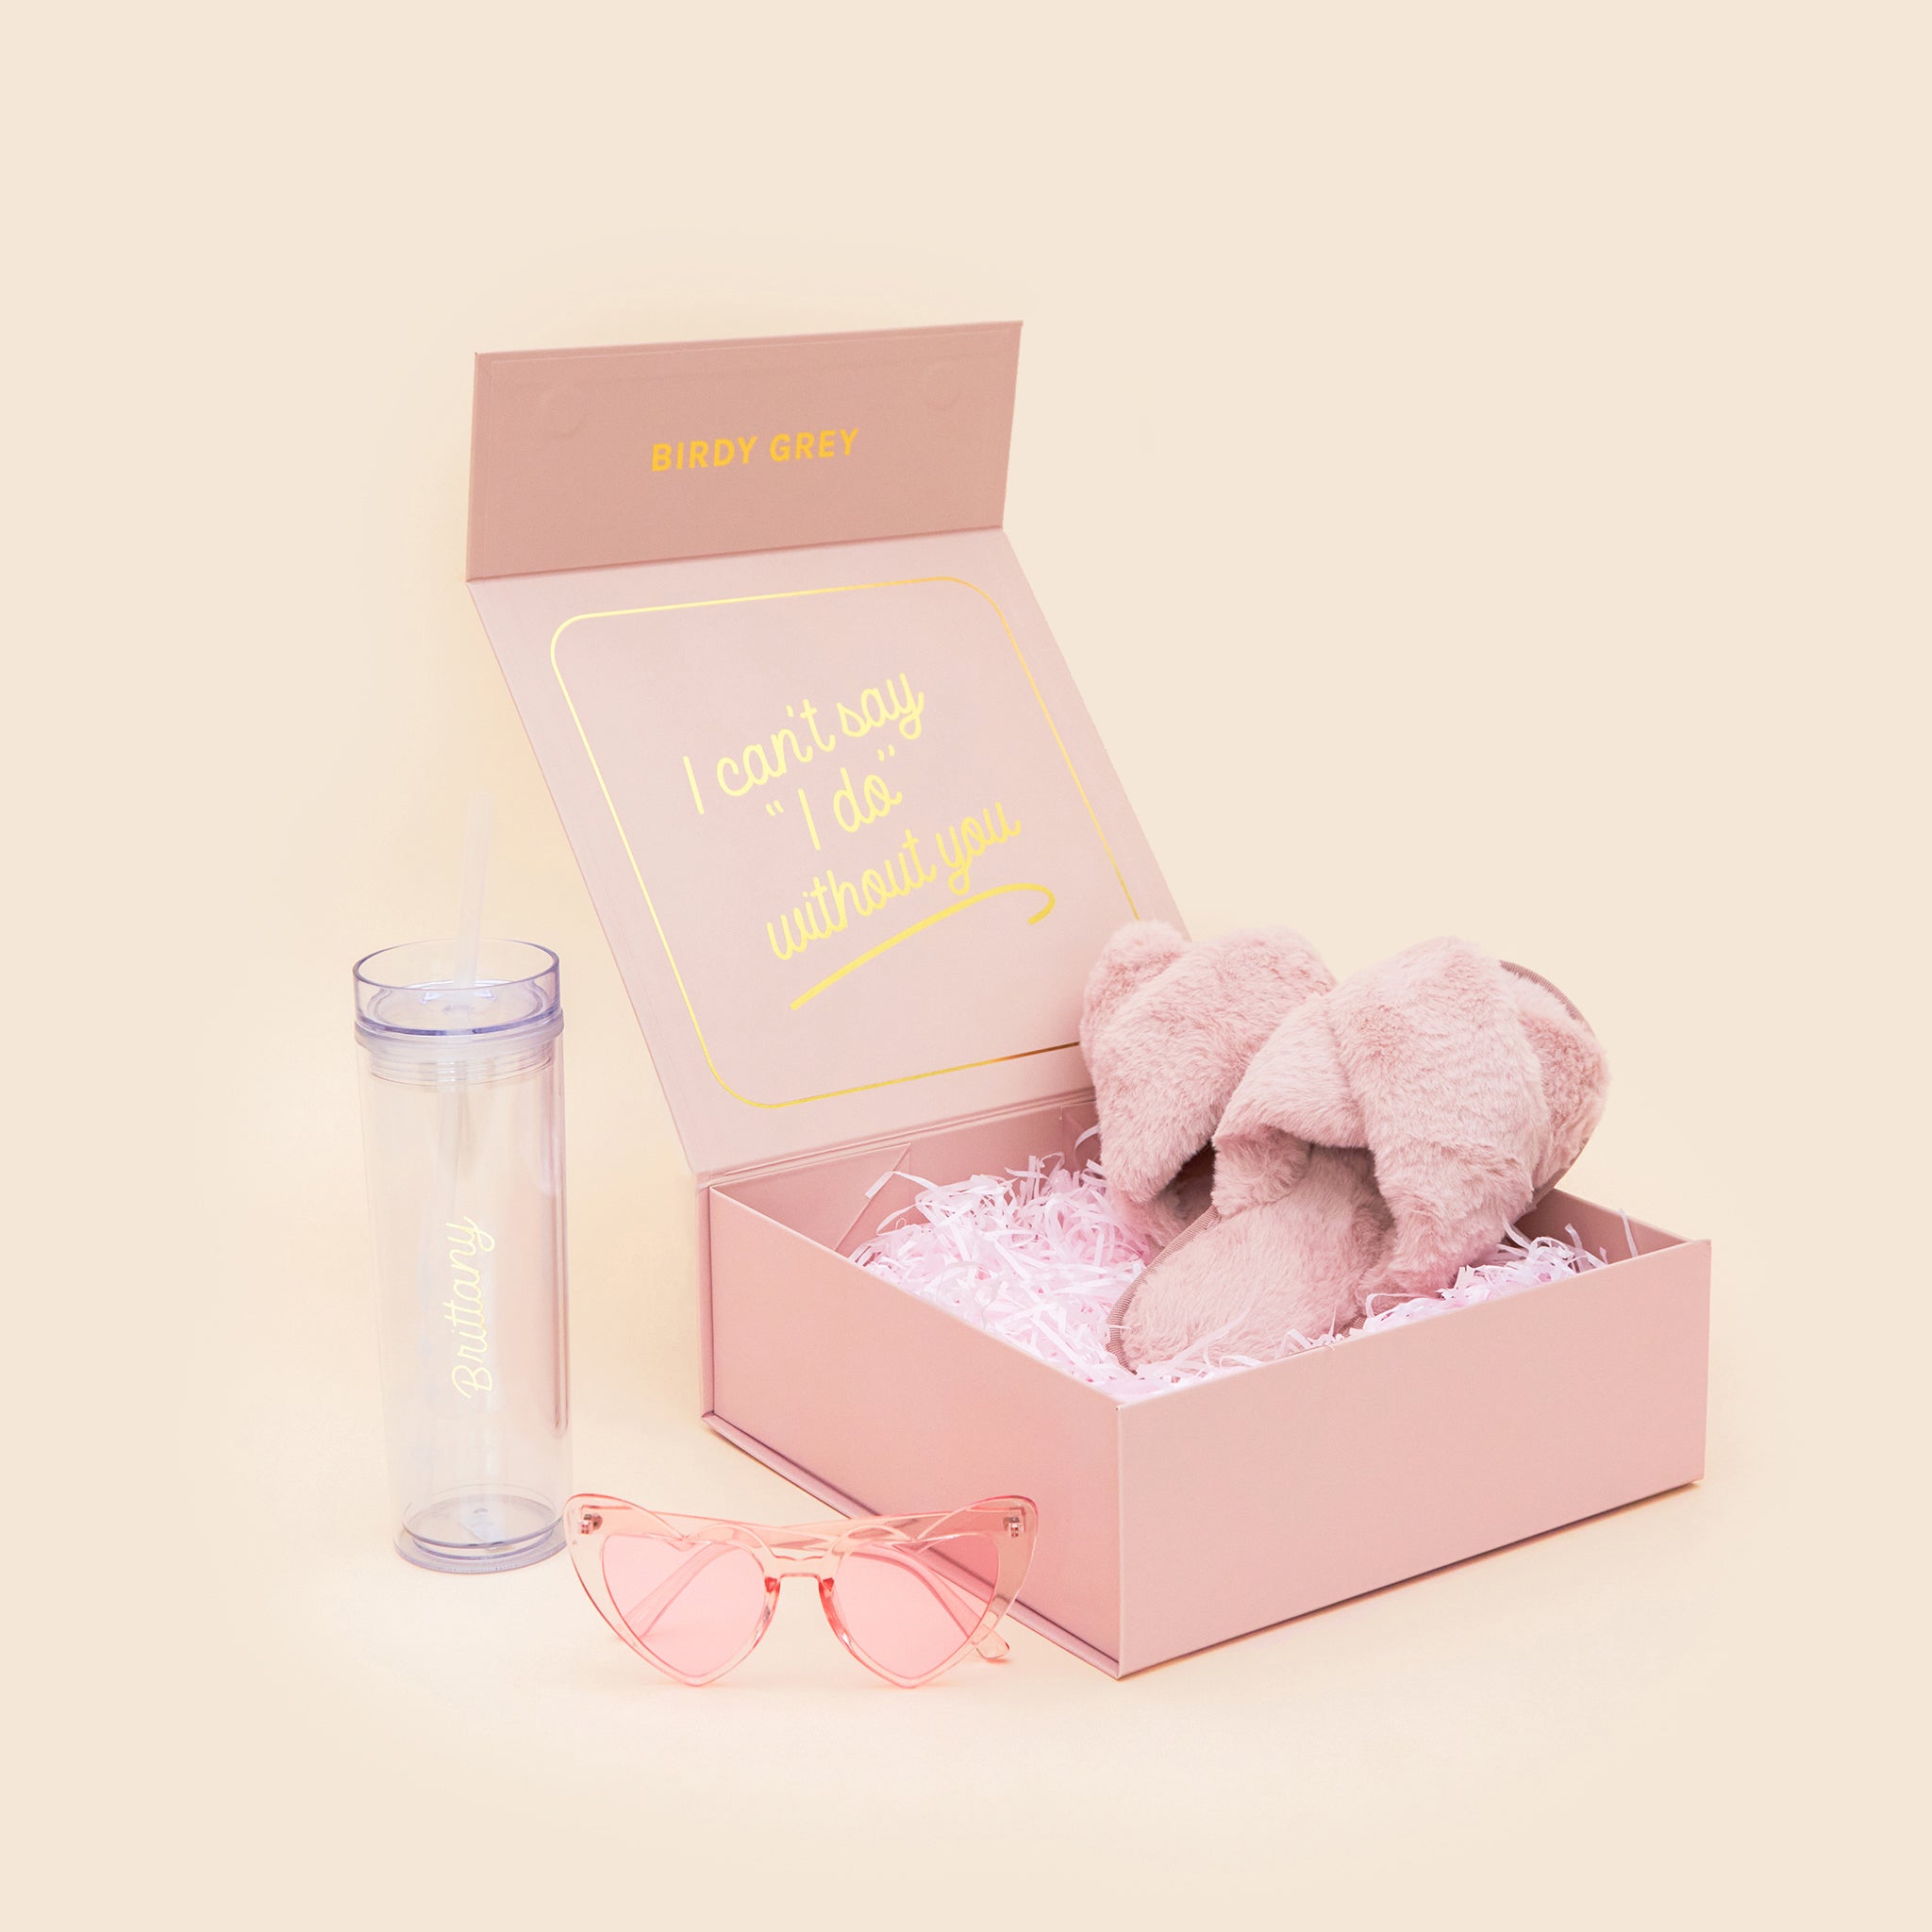 Personalized Proposal Box with tumblr, sunglasses and slippers in pink, front view